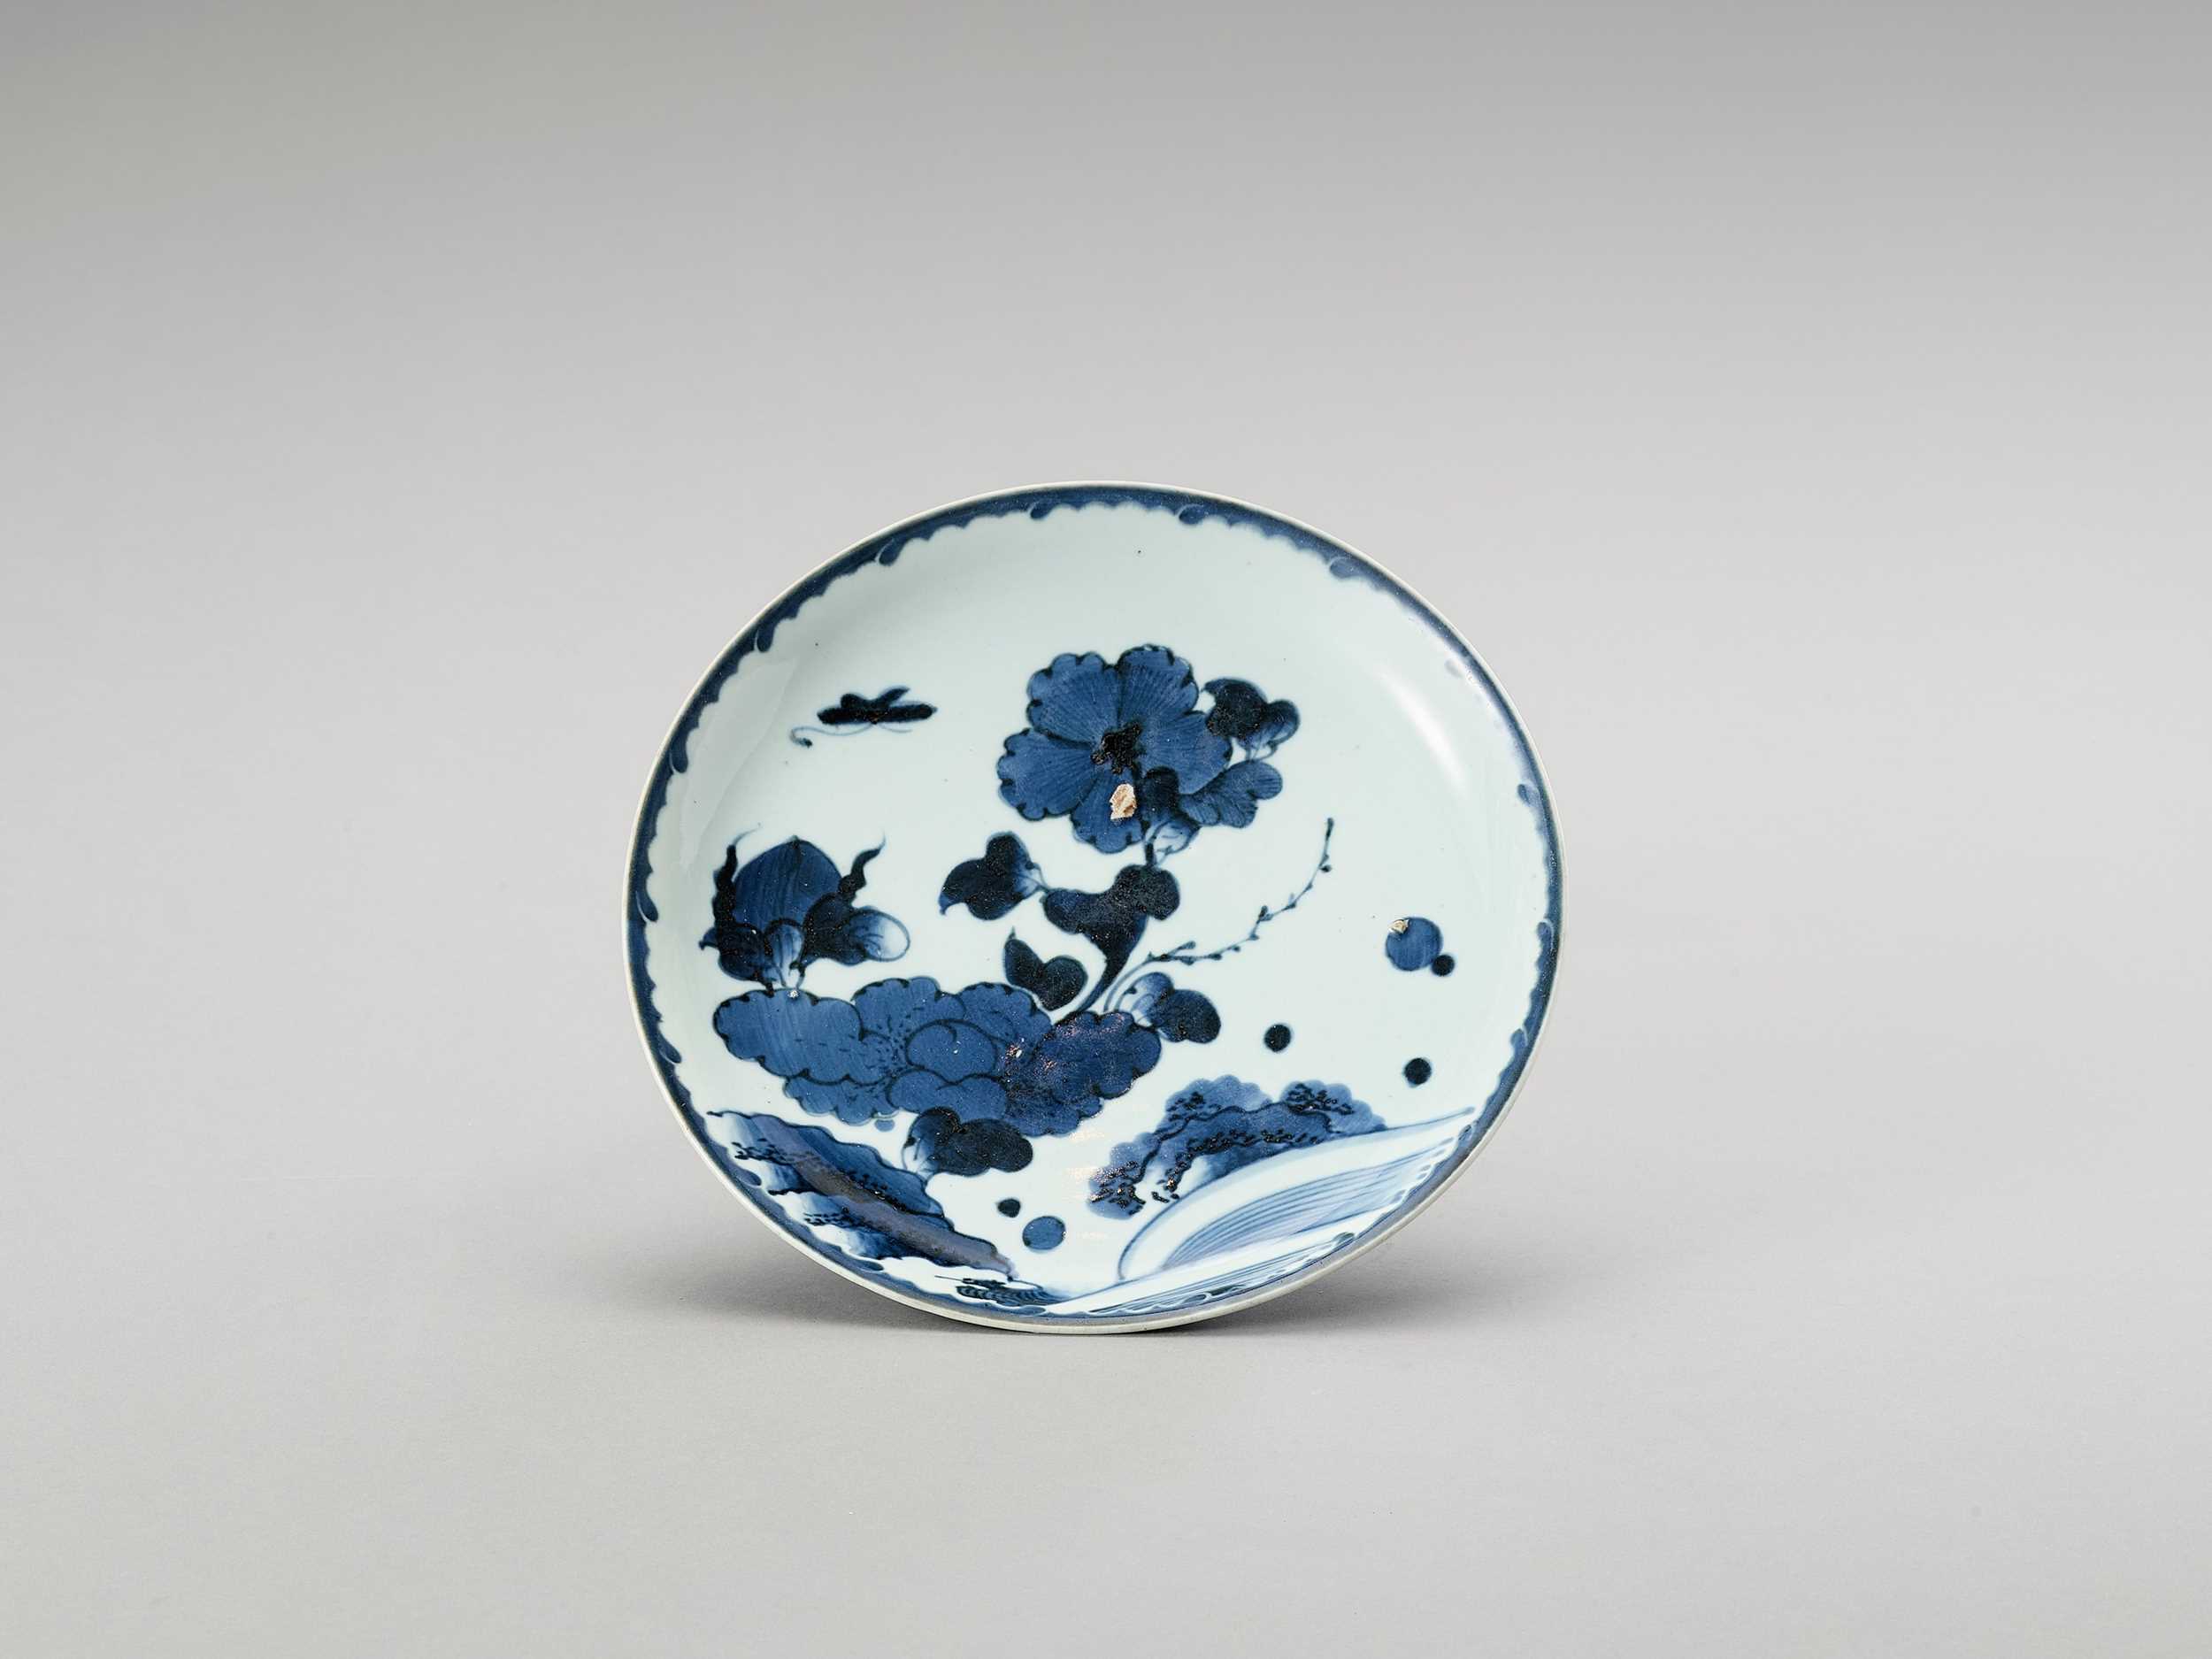 Lot 1024 - A BLUE AND WHITE ‘FLORAL’ PORCELAIN DISH